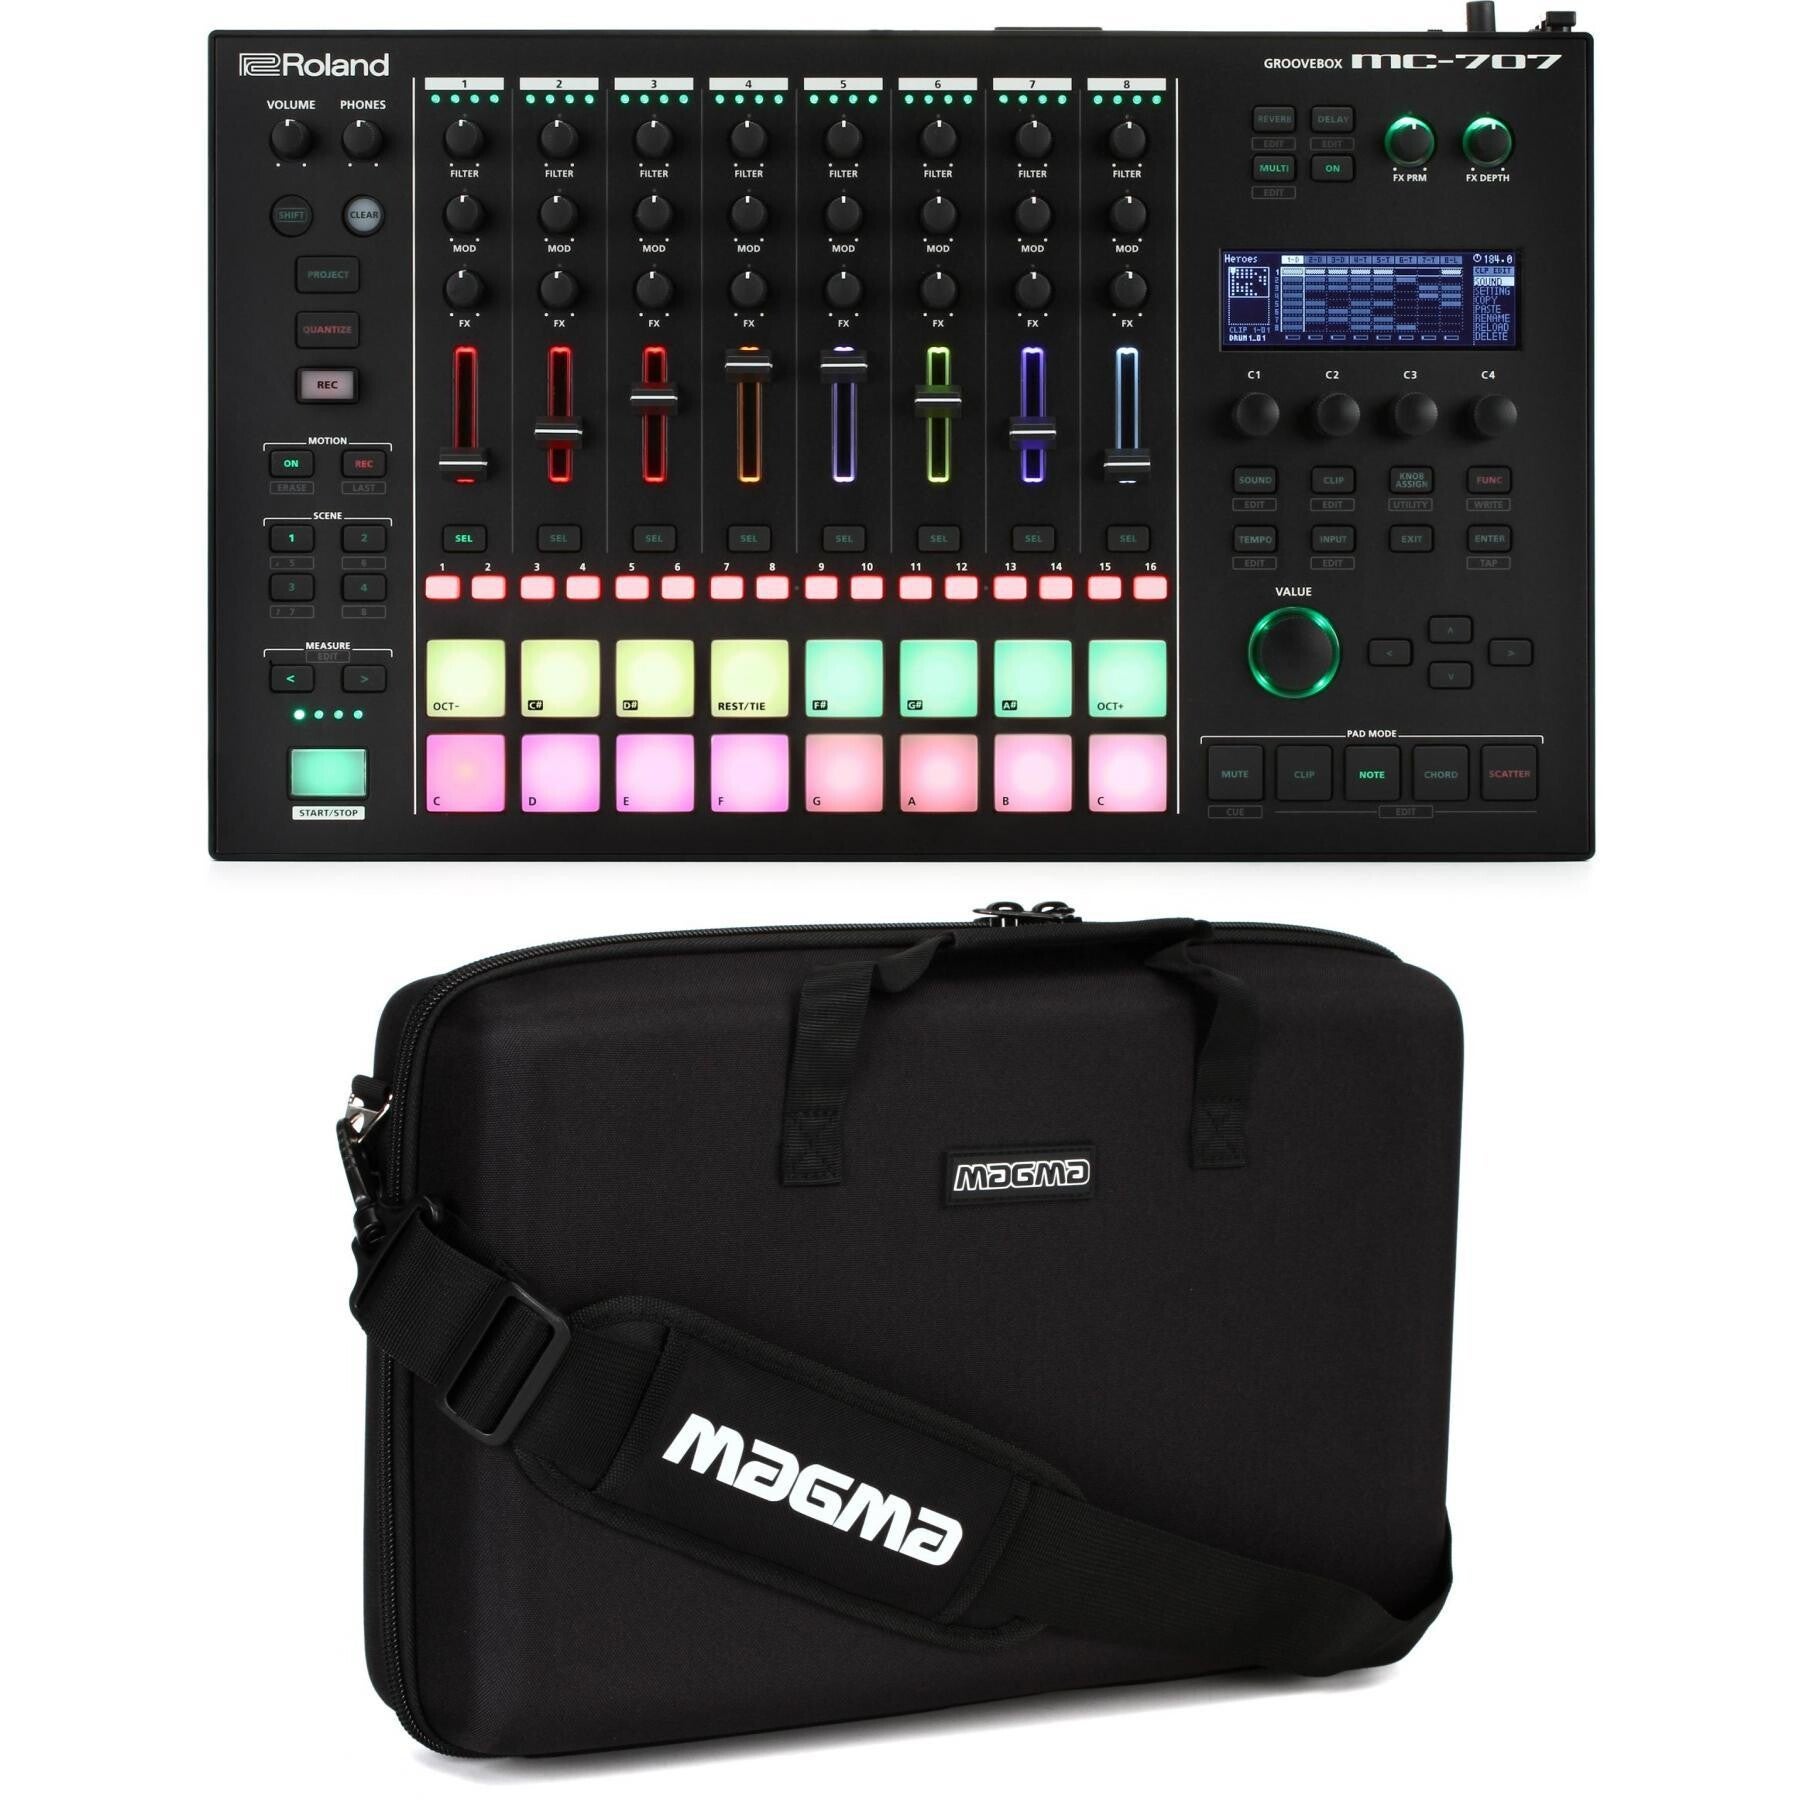 MC-707 8-track Groovebox with Magma Carry Case - Sweetwater